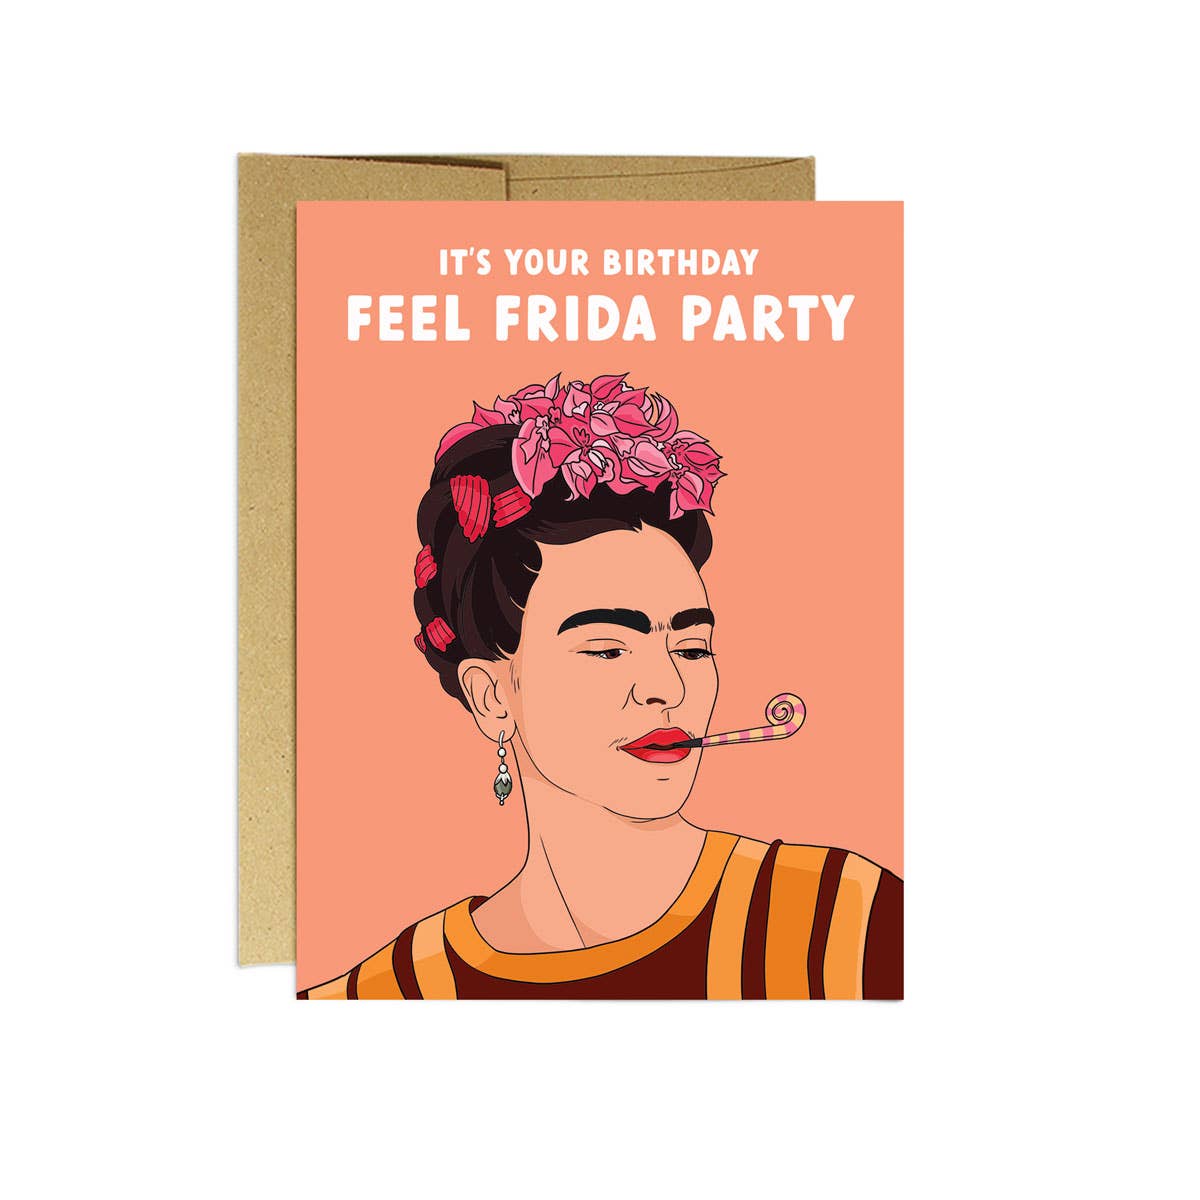 Party Mountain Paper co. - Frida Party | Birthday Card